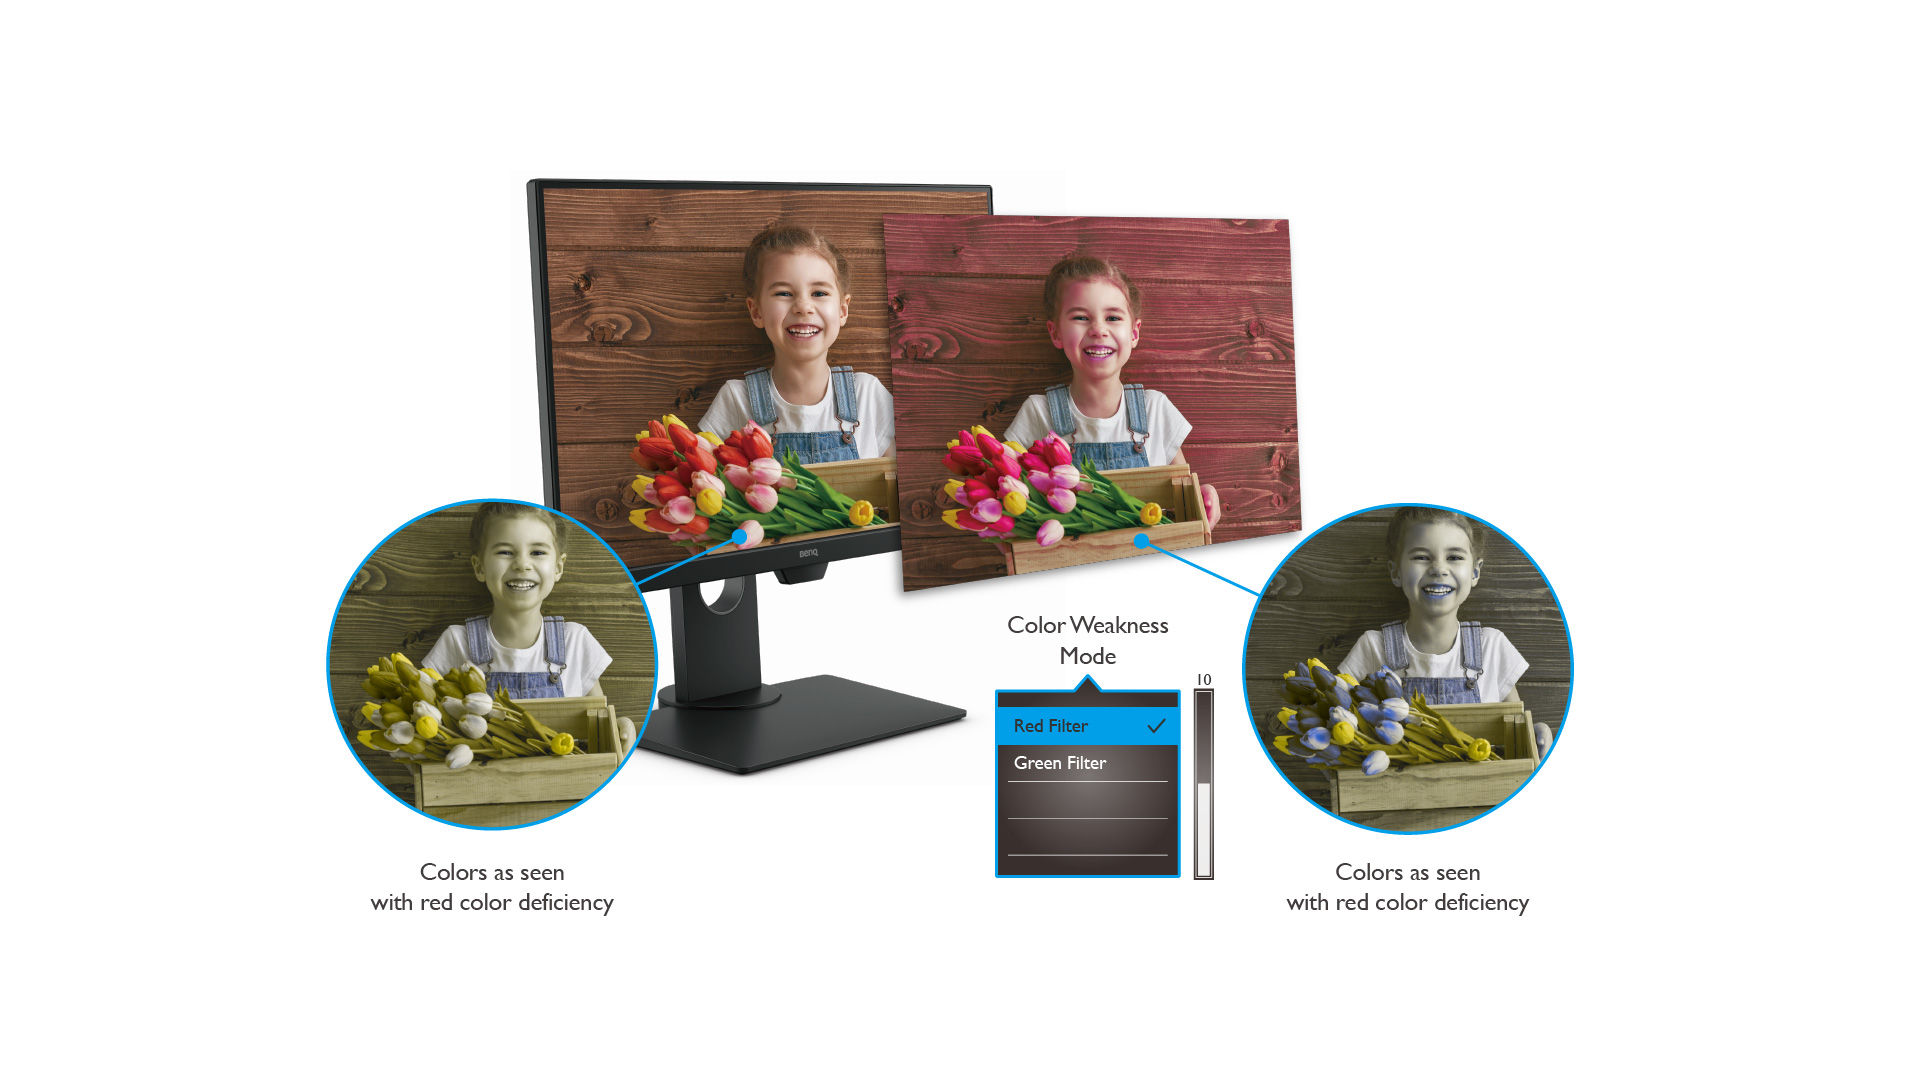 benq gw2480t has color weakness mode with red and green filters, helping individuals with common types of color vision deficiency distinguish colors more easily